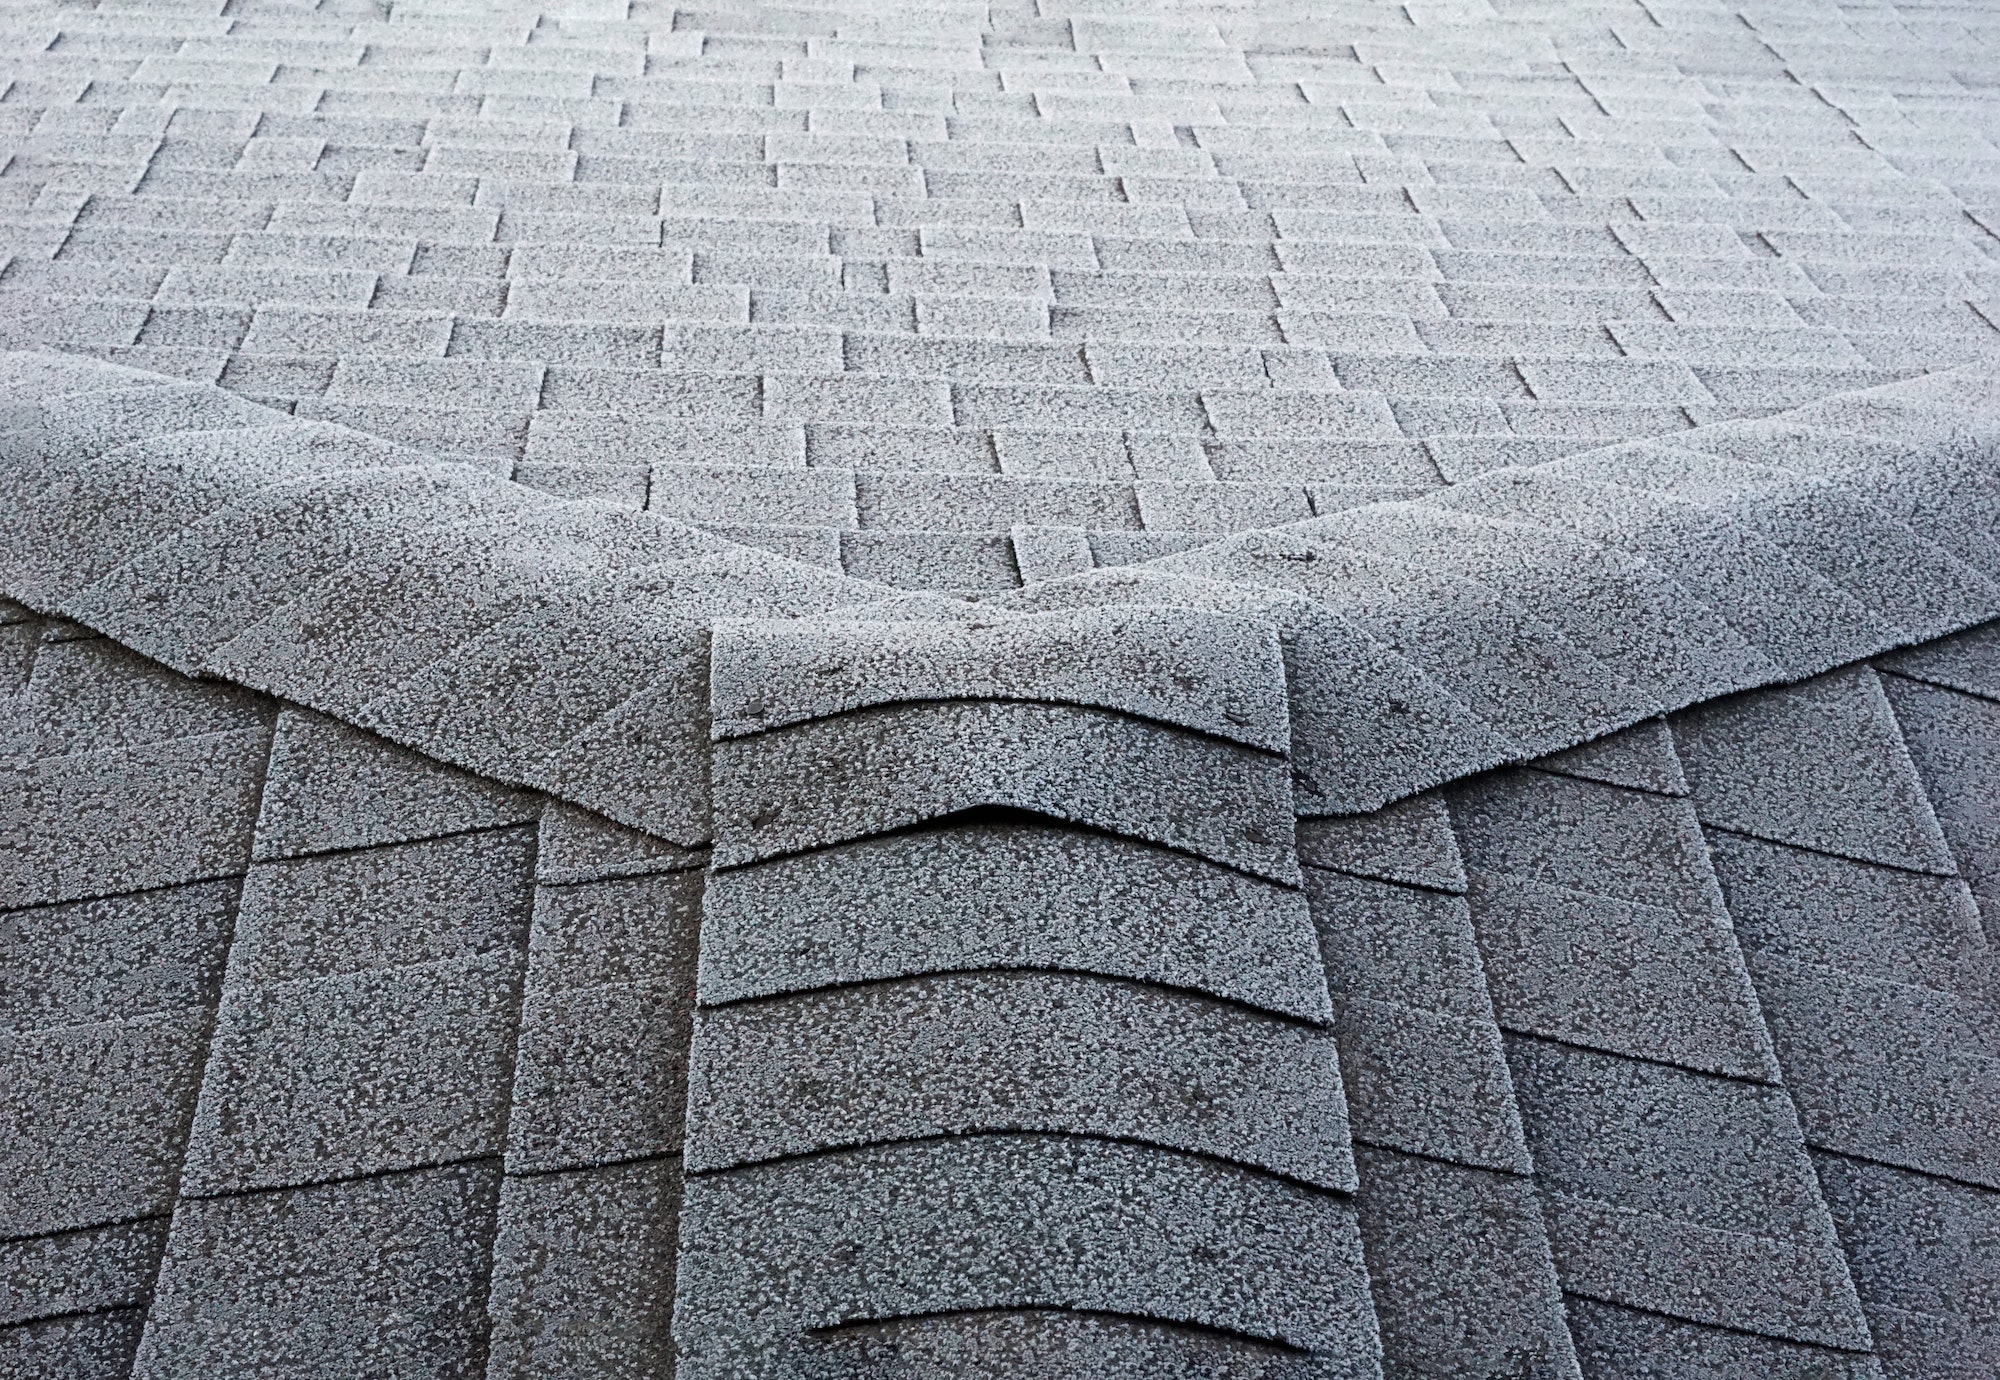 Frost on roof shingles.